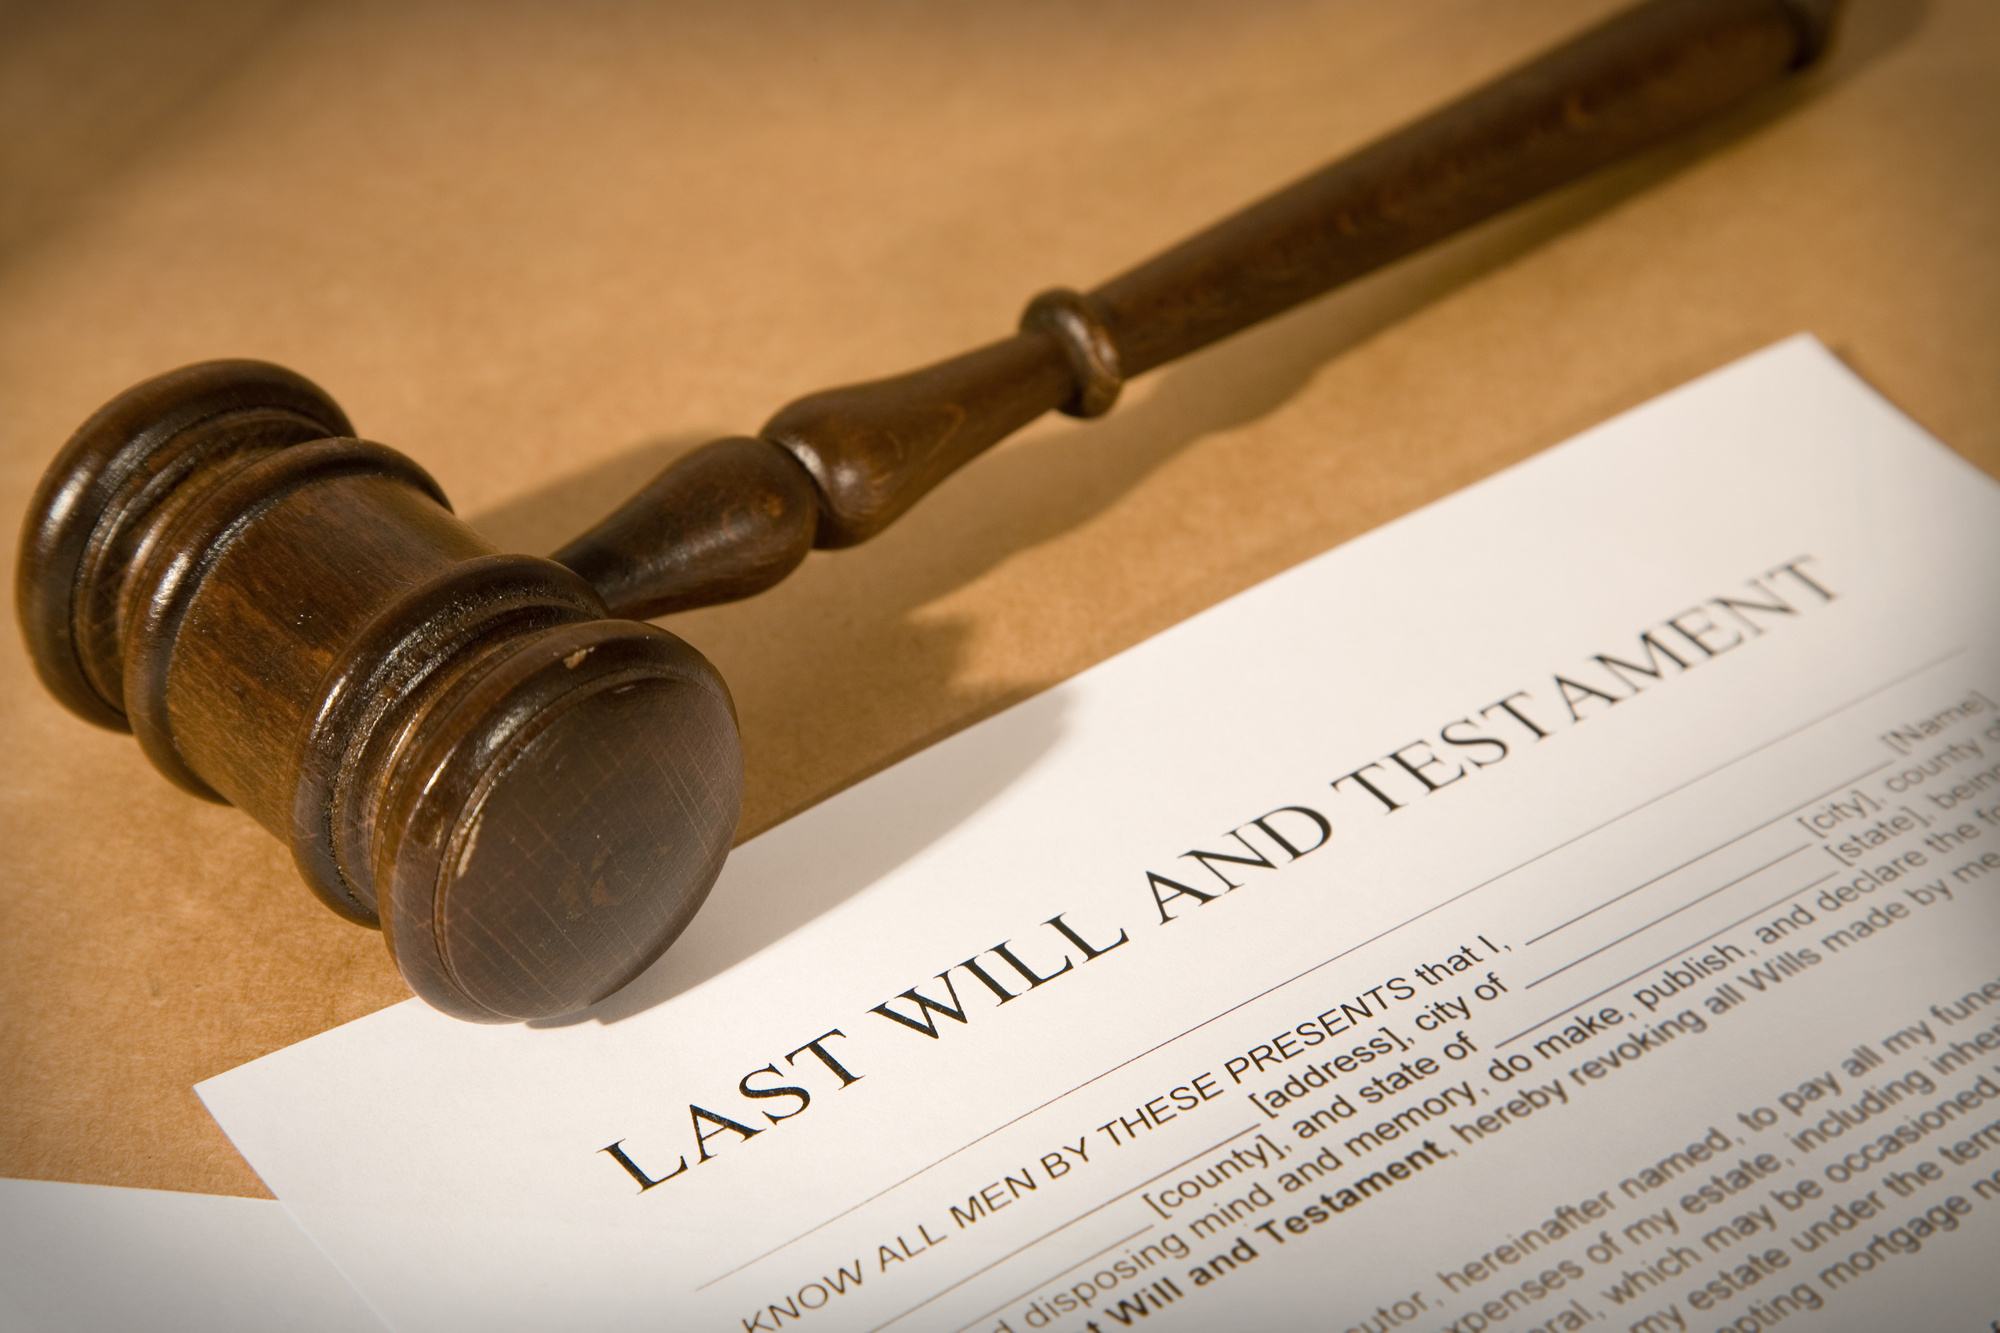 last-will-and-testament-form-with-gavel-estate-planning-real-estate-business-law-firm